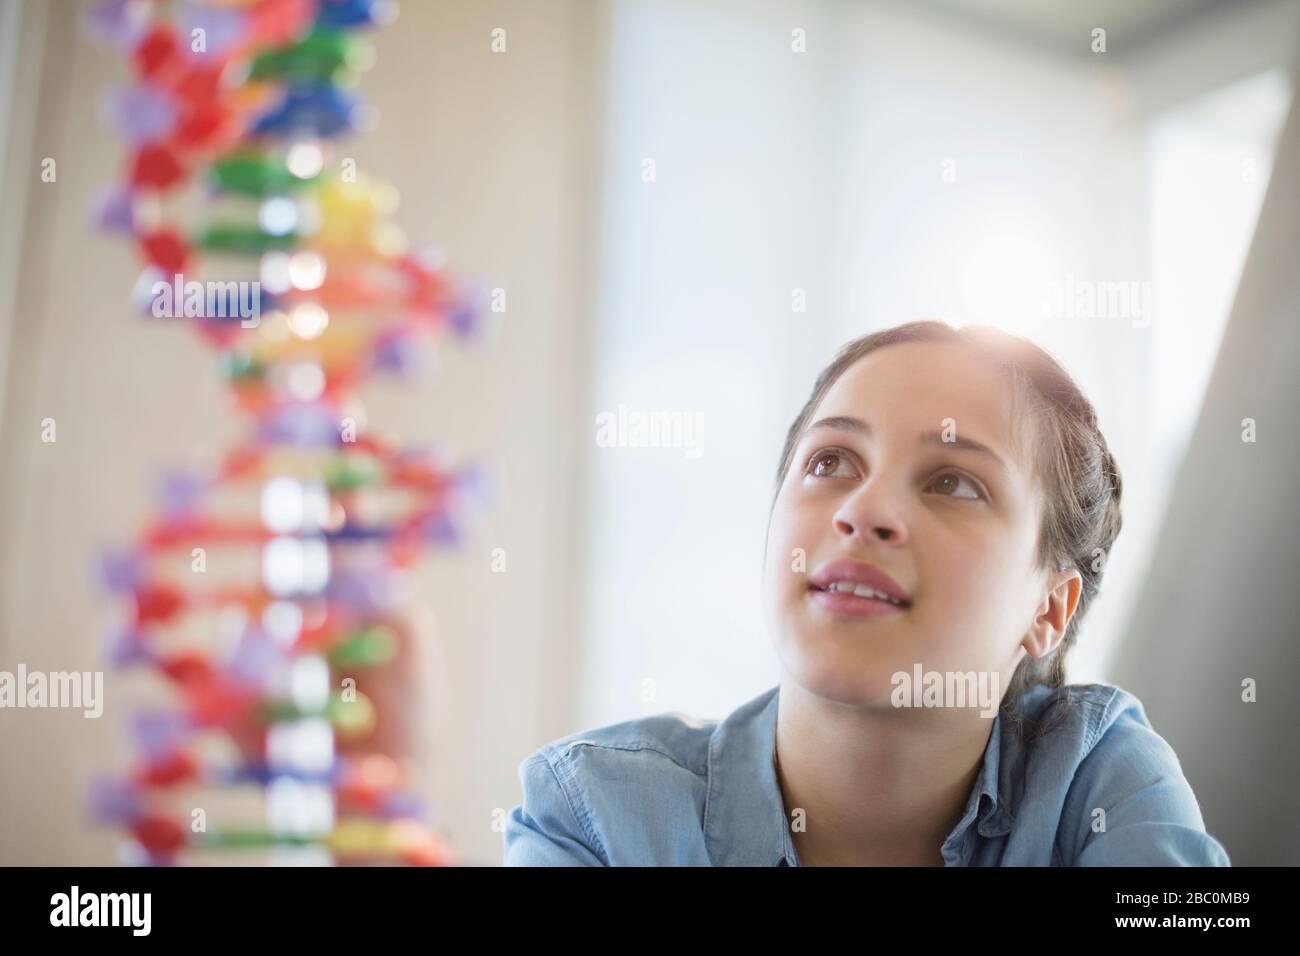 Pensive girl students examining DNA model in classroom laboratory Stock Photo